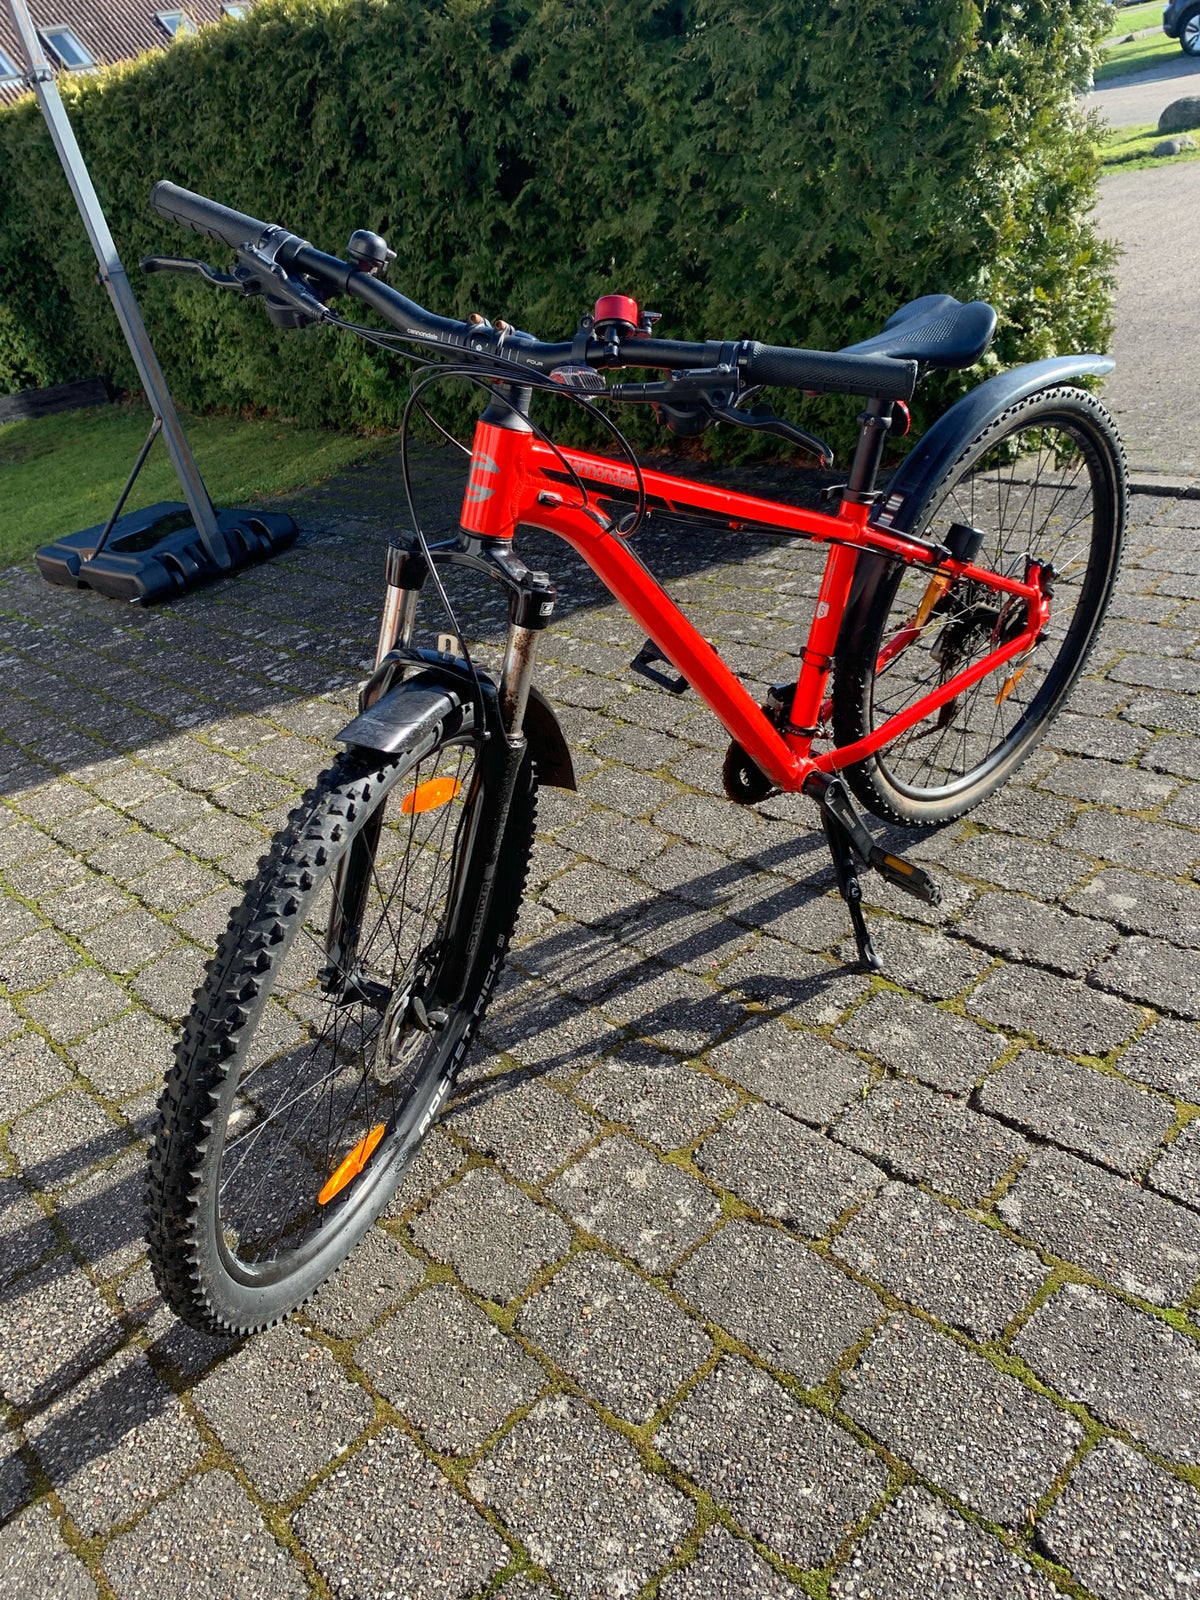 Cannondale Trail 7, hardtail, 18 gear